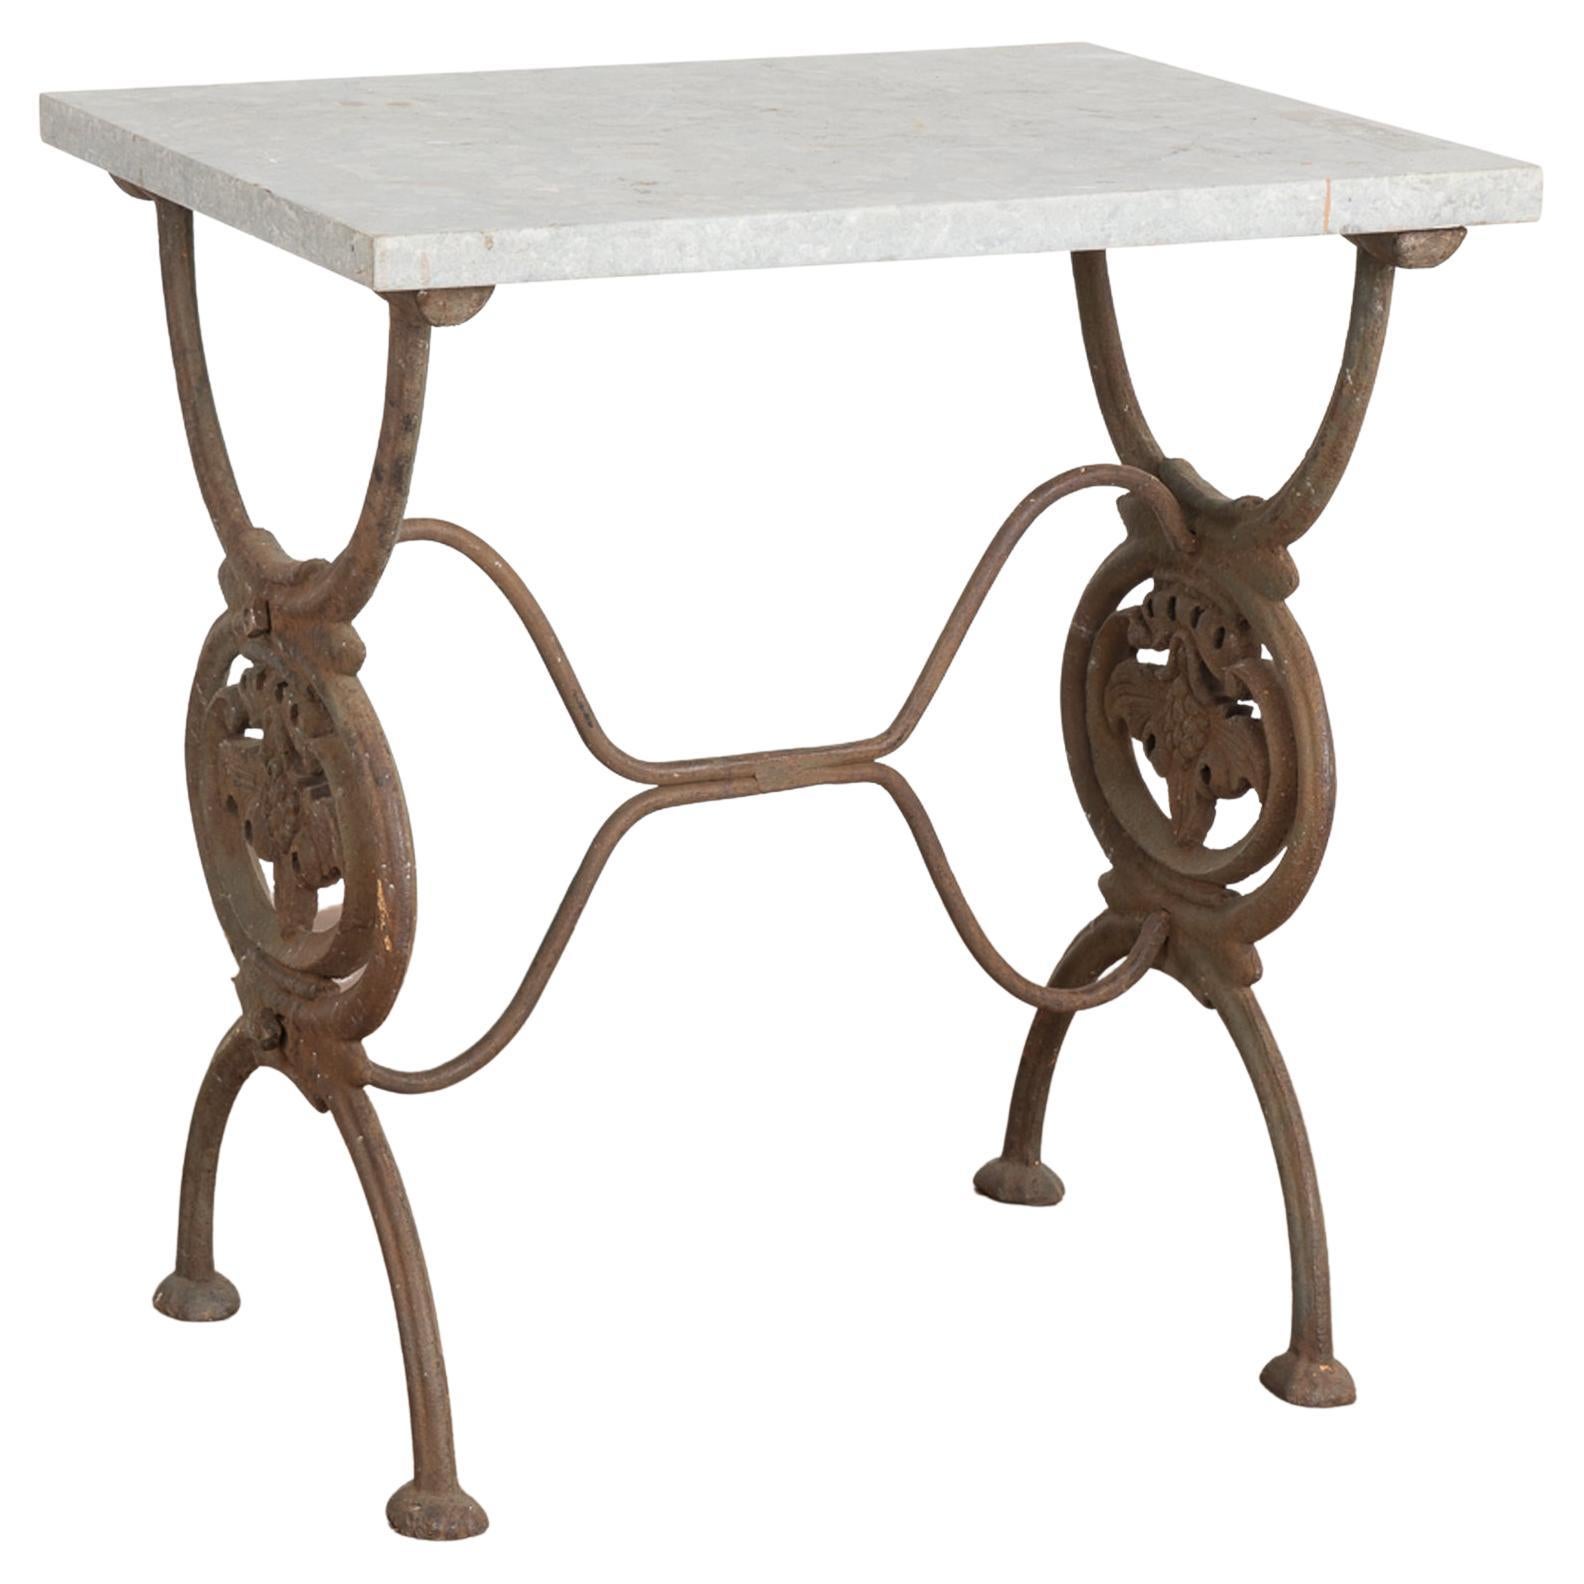 Stone Top Iron Base Side Table, Sweden circa 1880 For Sale